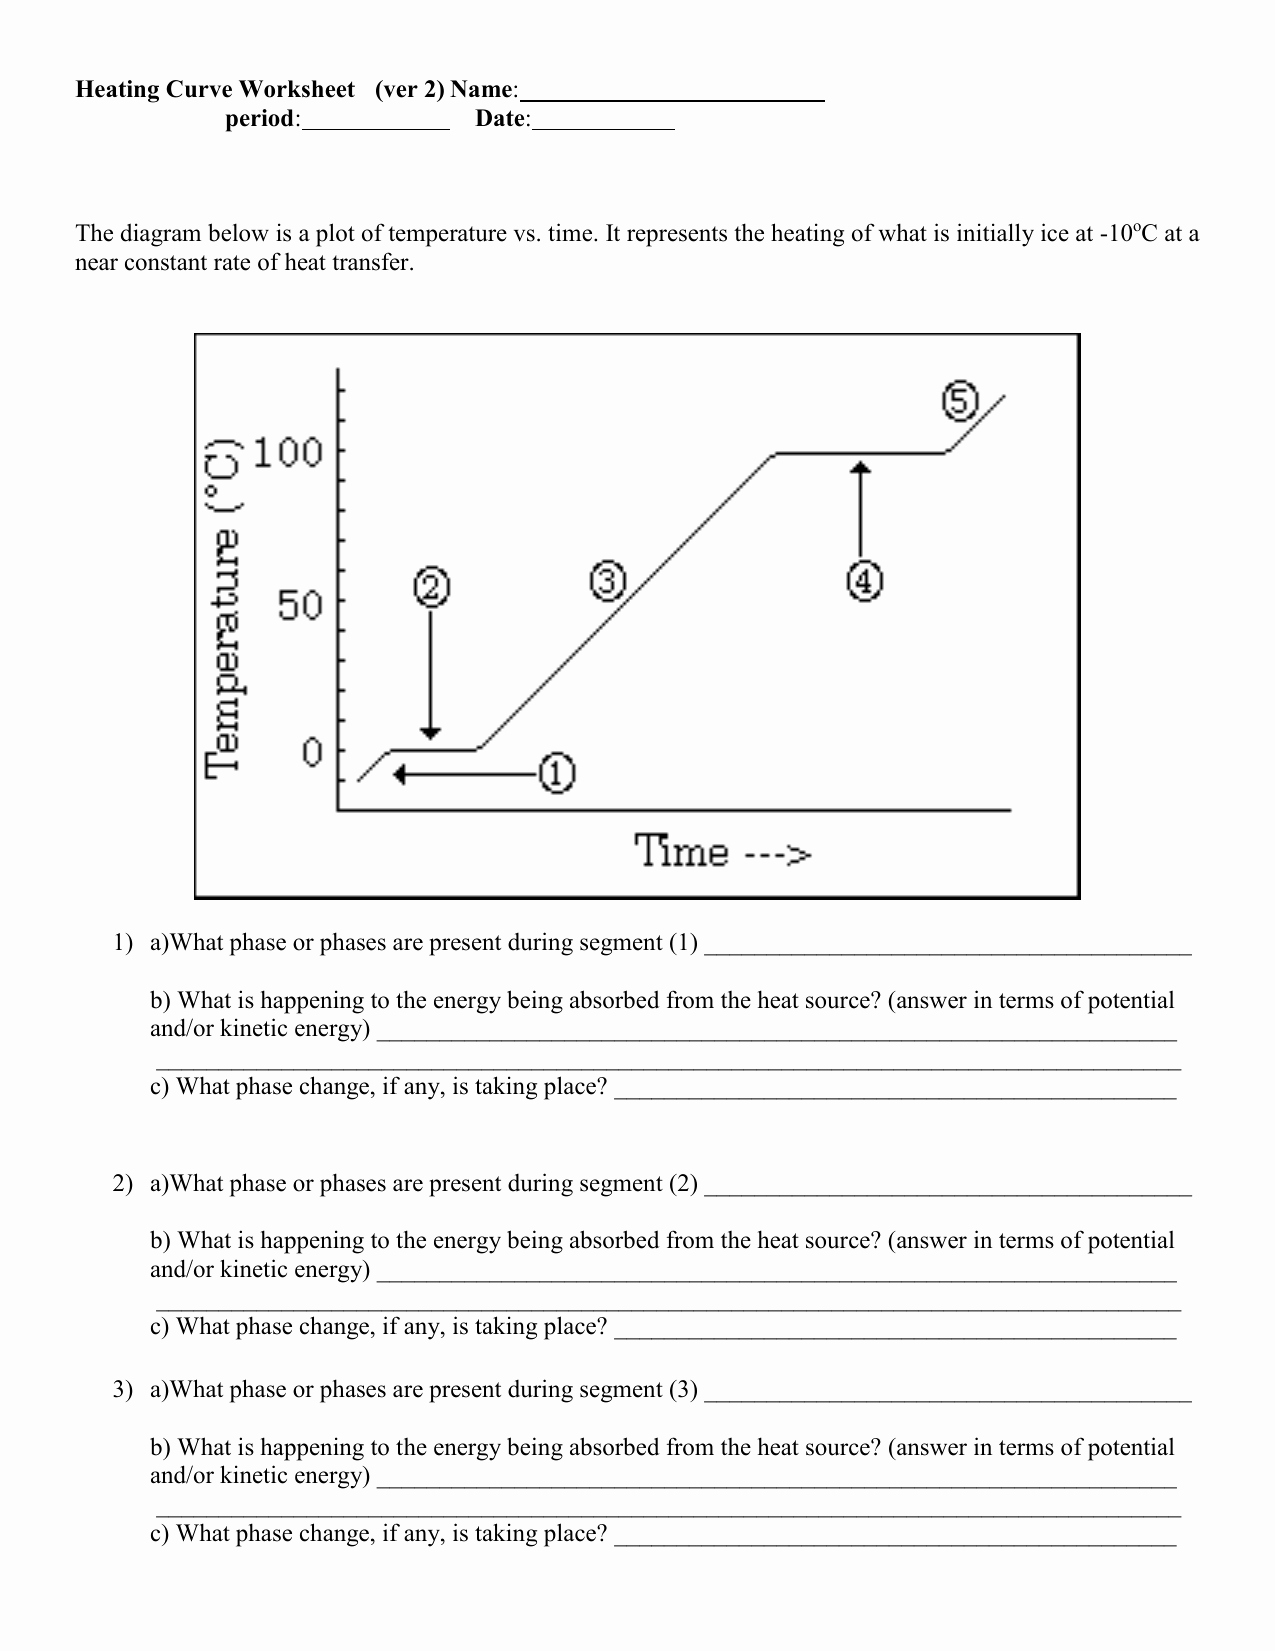 Heating And Cooling Curves Worksheet